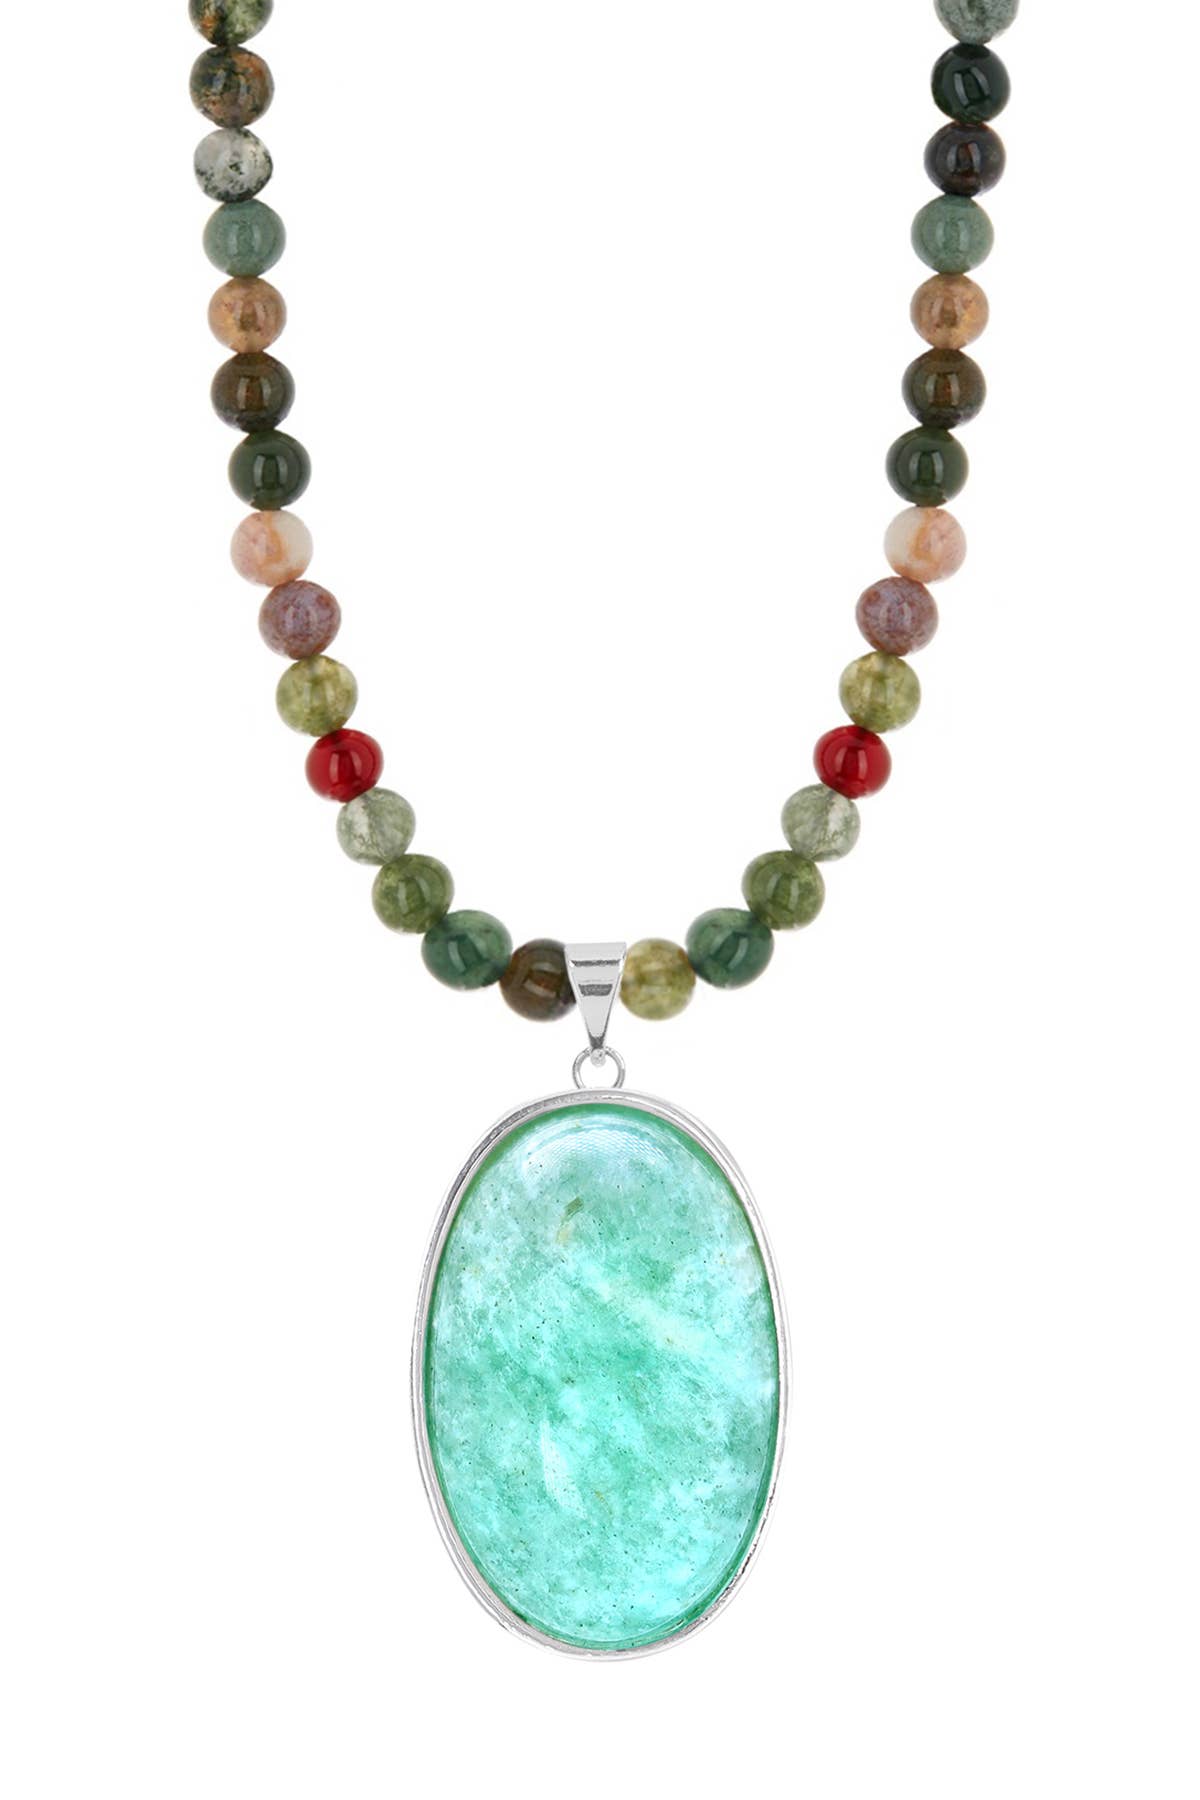 Mixed Jasper Beads Necklace With Amazonite Pendant - SF